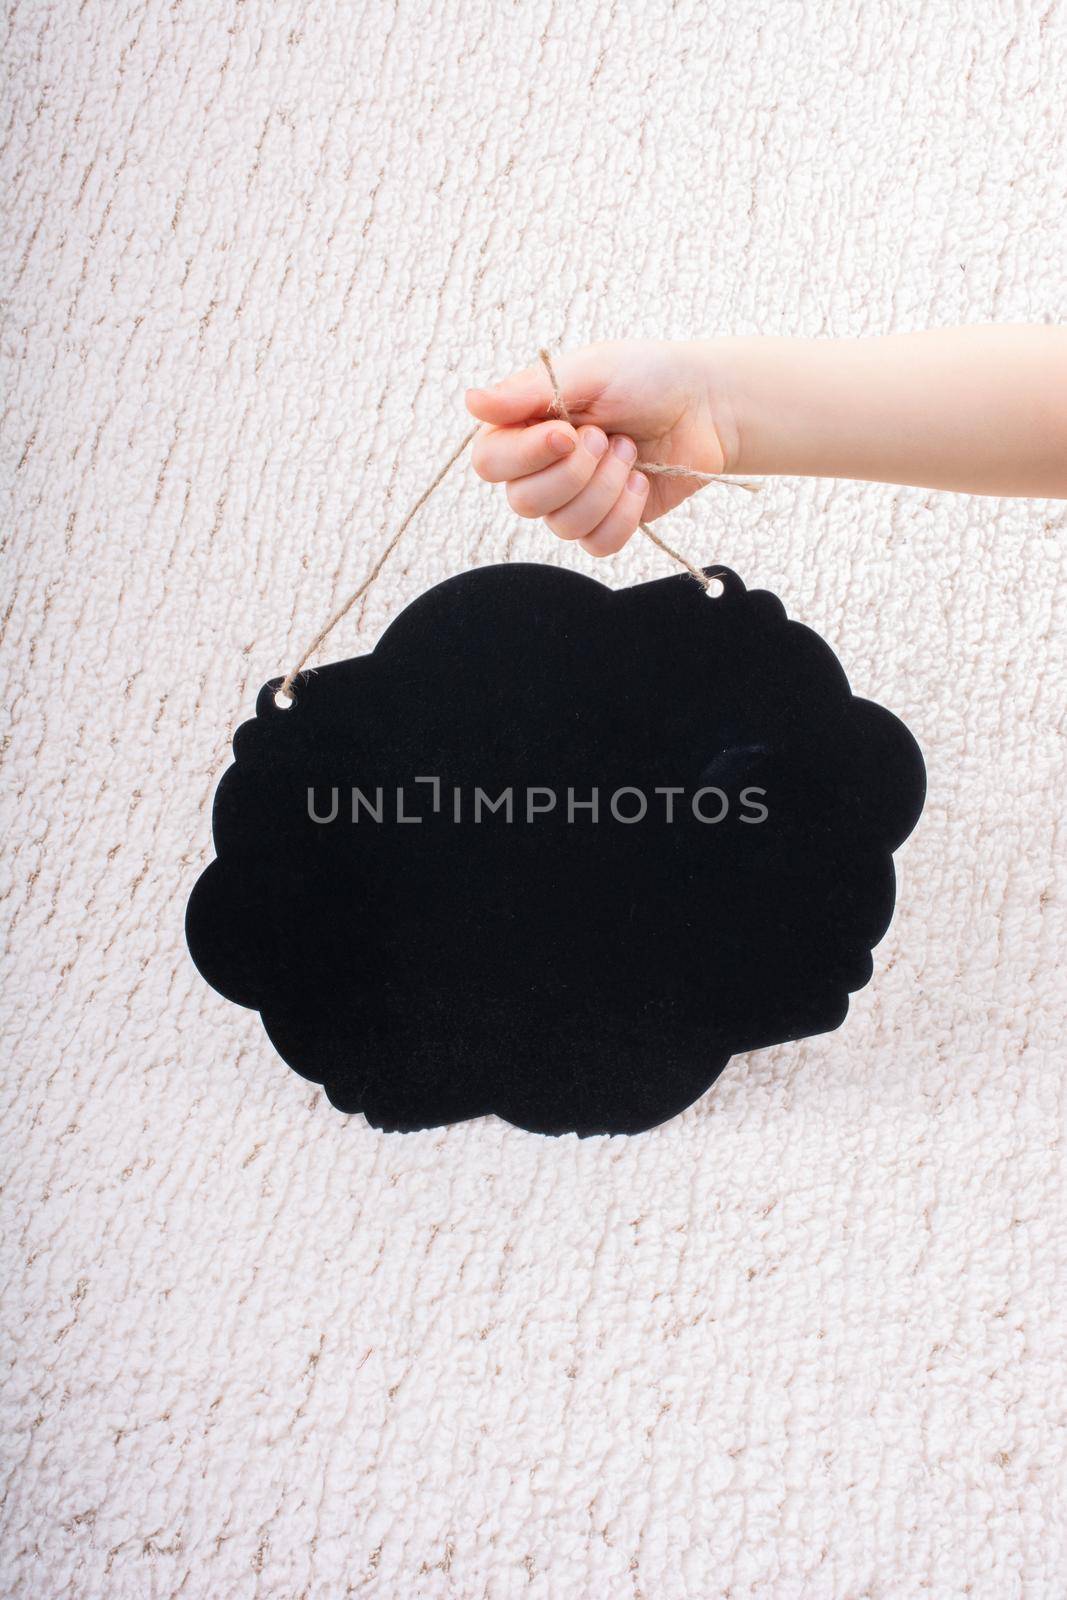 Black speech bubble shaped notice board in hand on white background